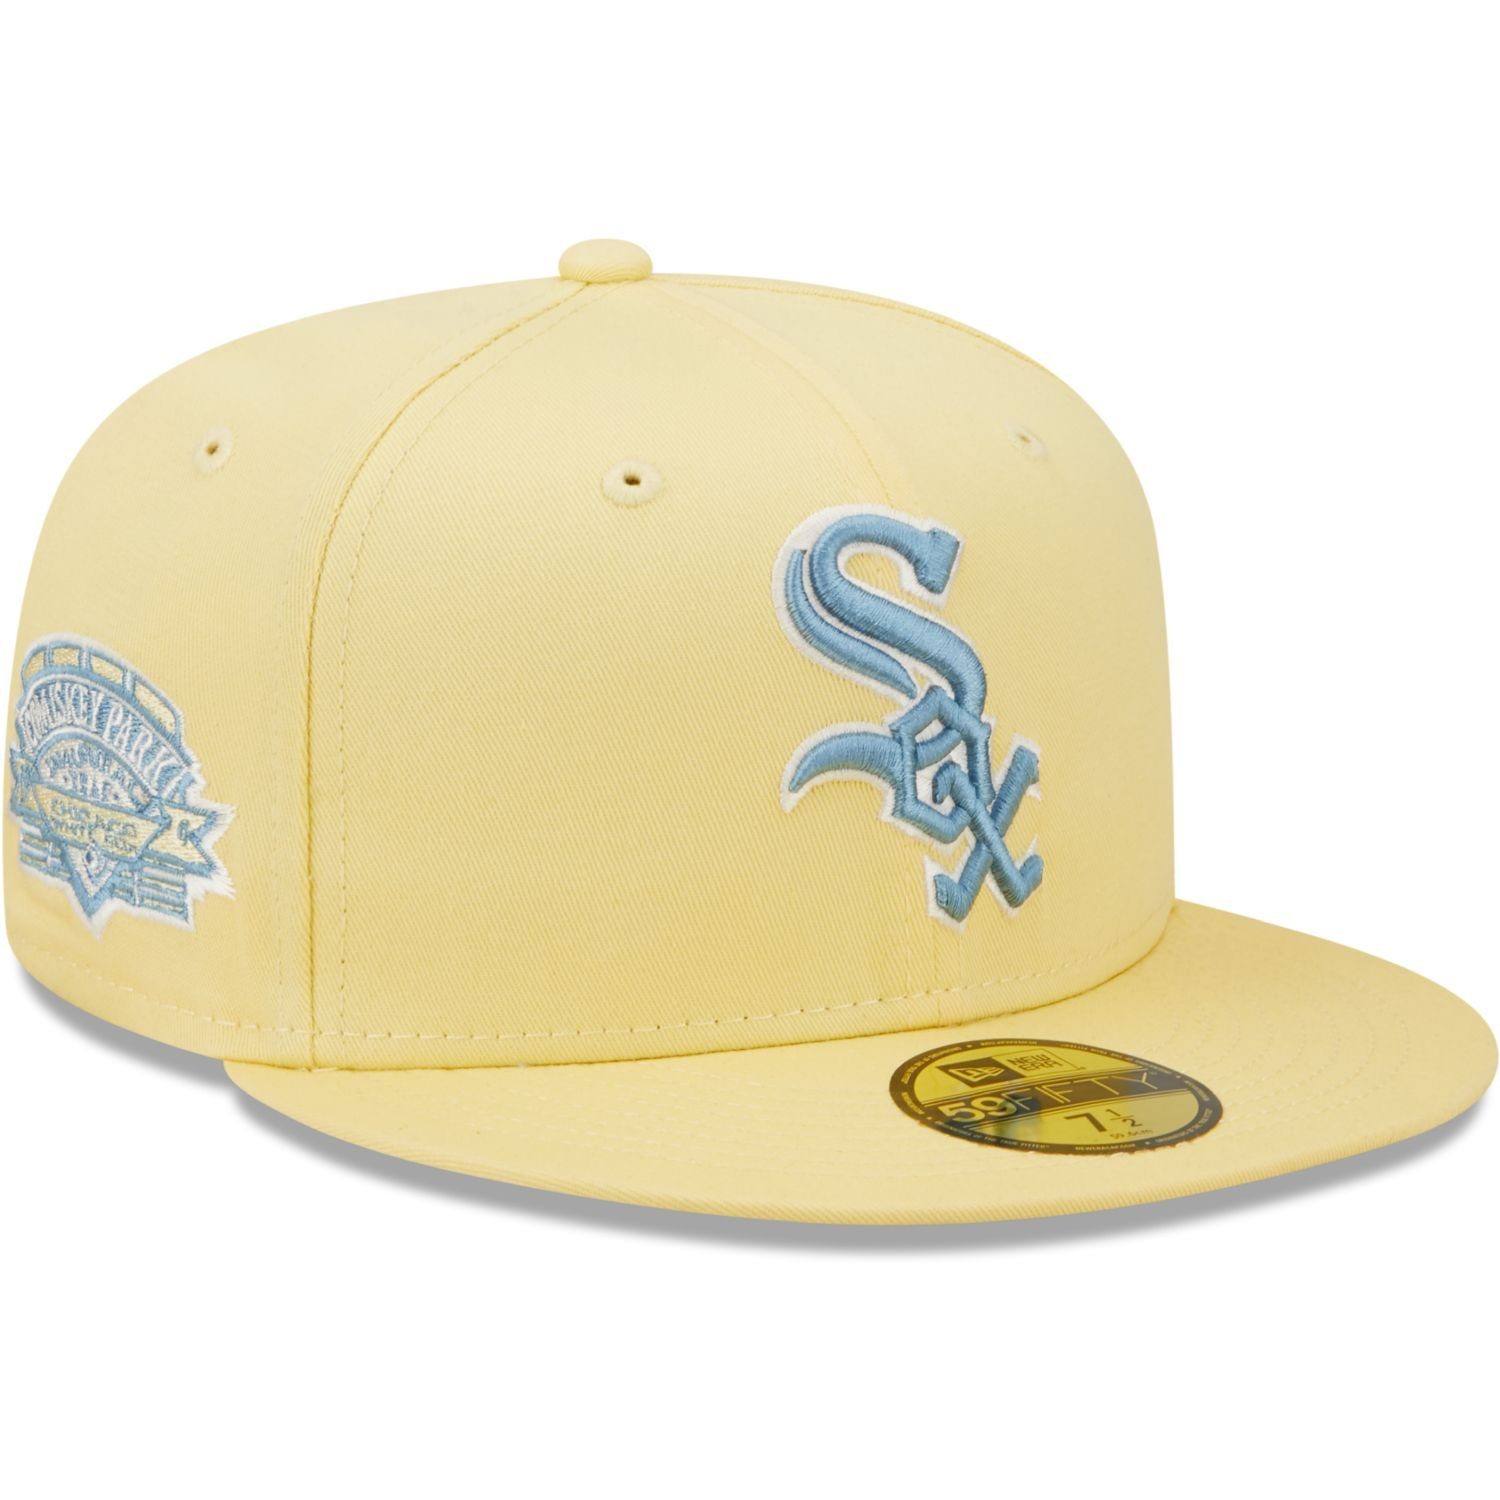 White Era New Fitted Cap Chicago COOPERSTOWN 59Fifty Sox